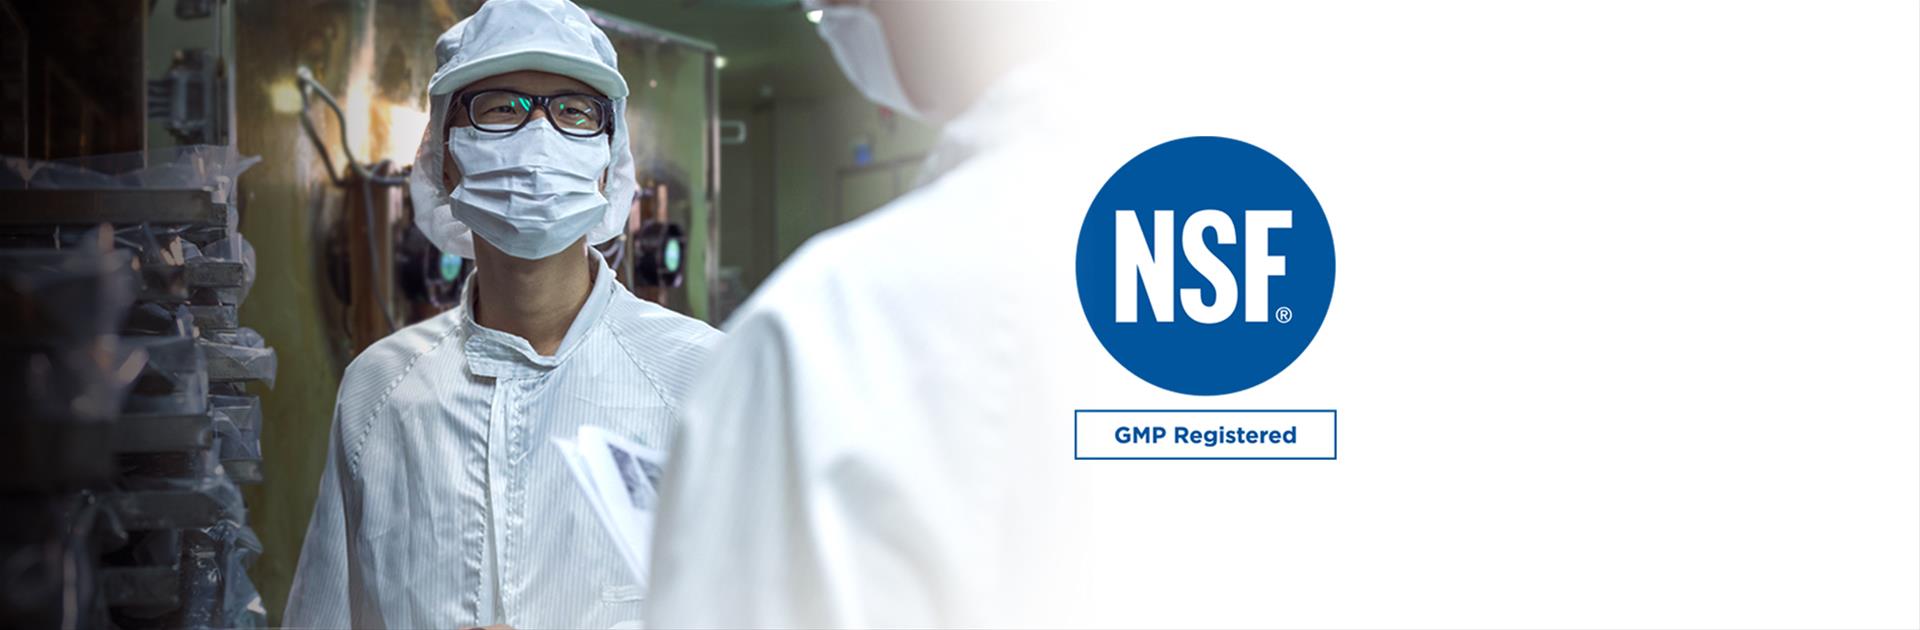 SYNBIO TECH INC. received NSF GMP registration for supplements.